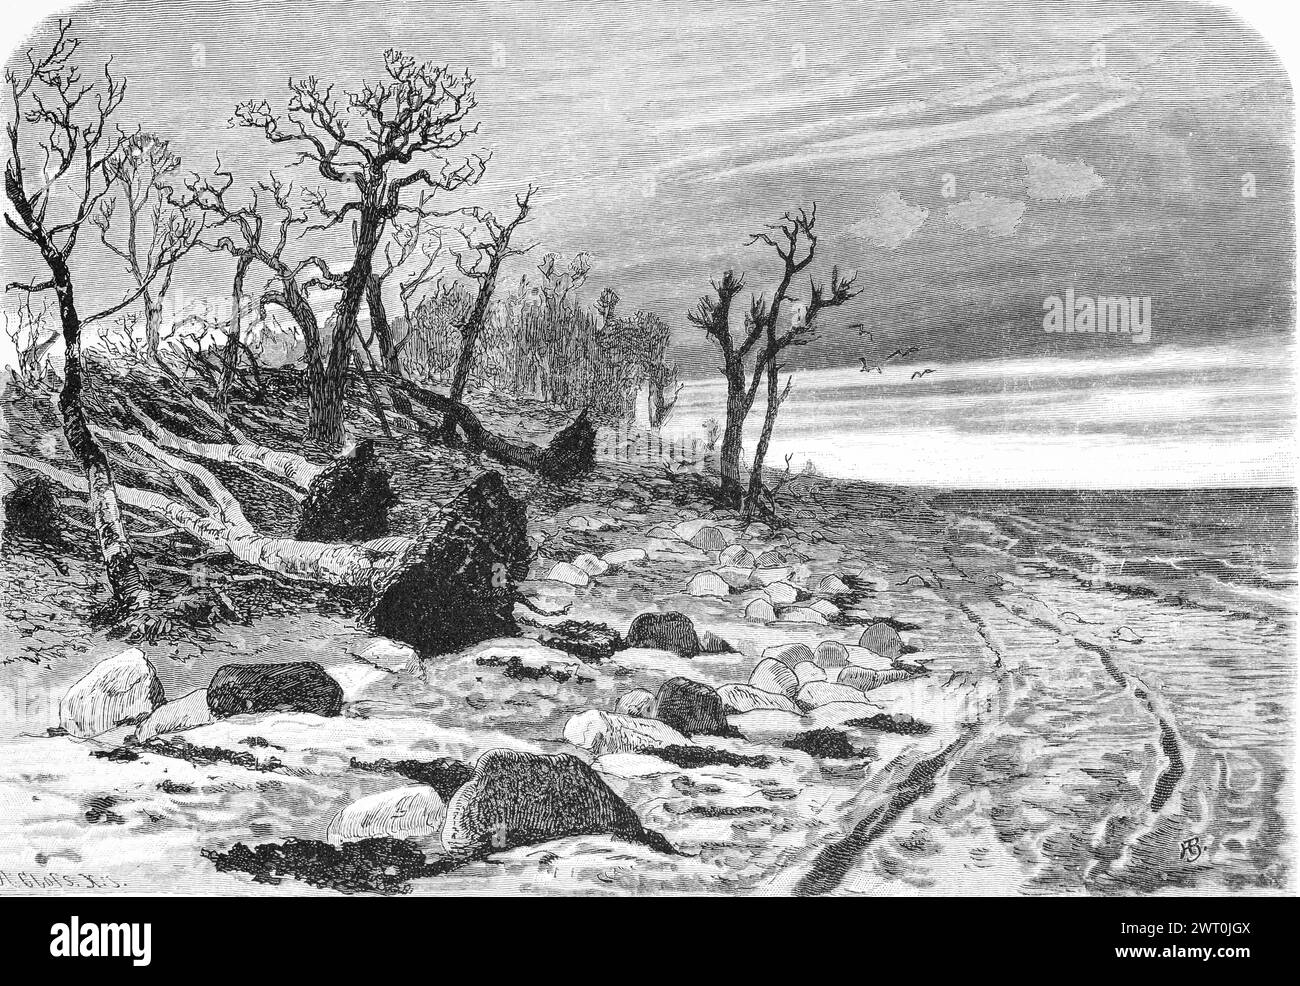 Destroyed beech forest after the storm surge, Baltic Sea, Mecklenburg-Western Pomerania, Germany, beach, tree root, stones, nature, historical Stock Photo